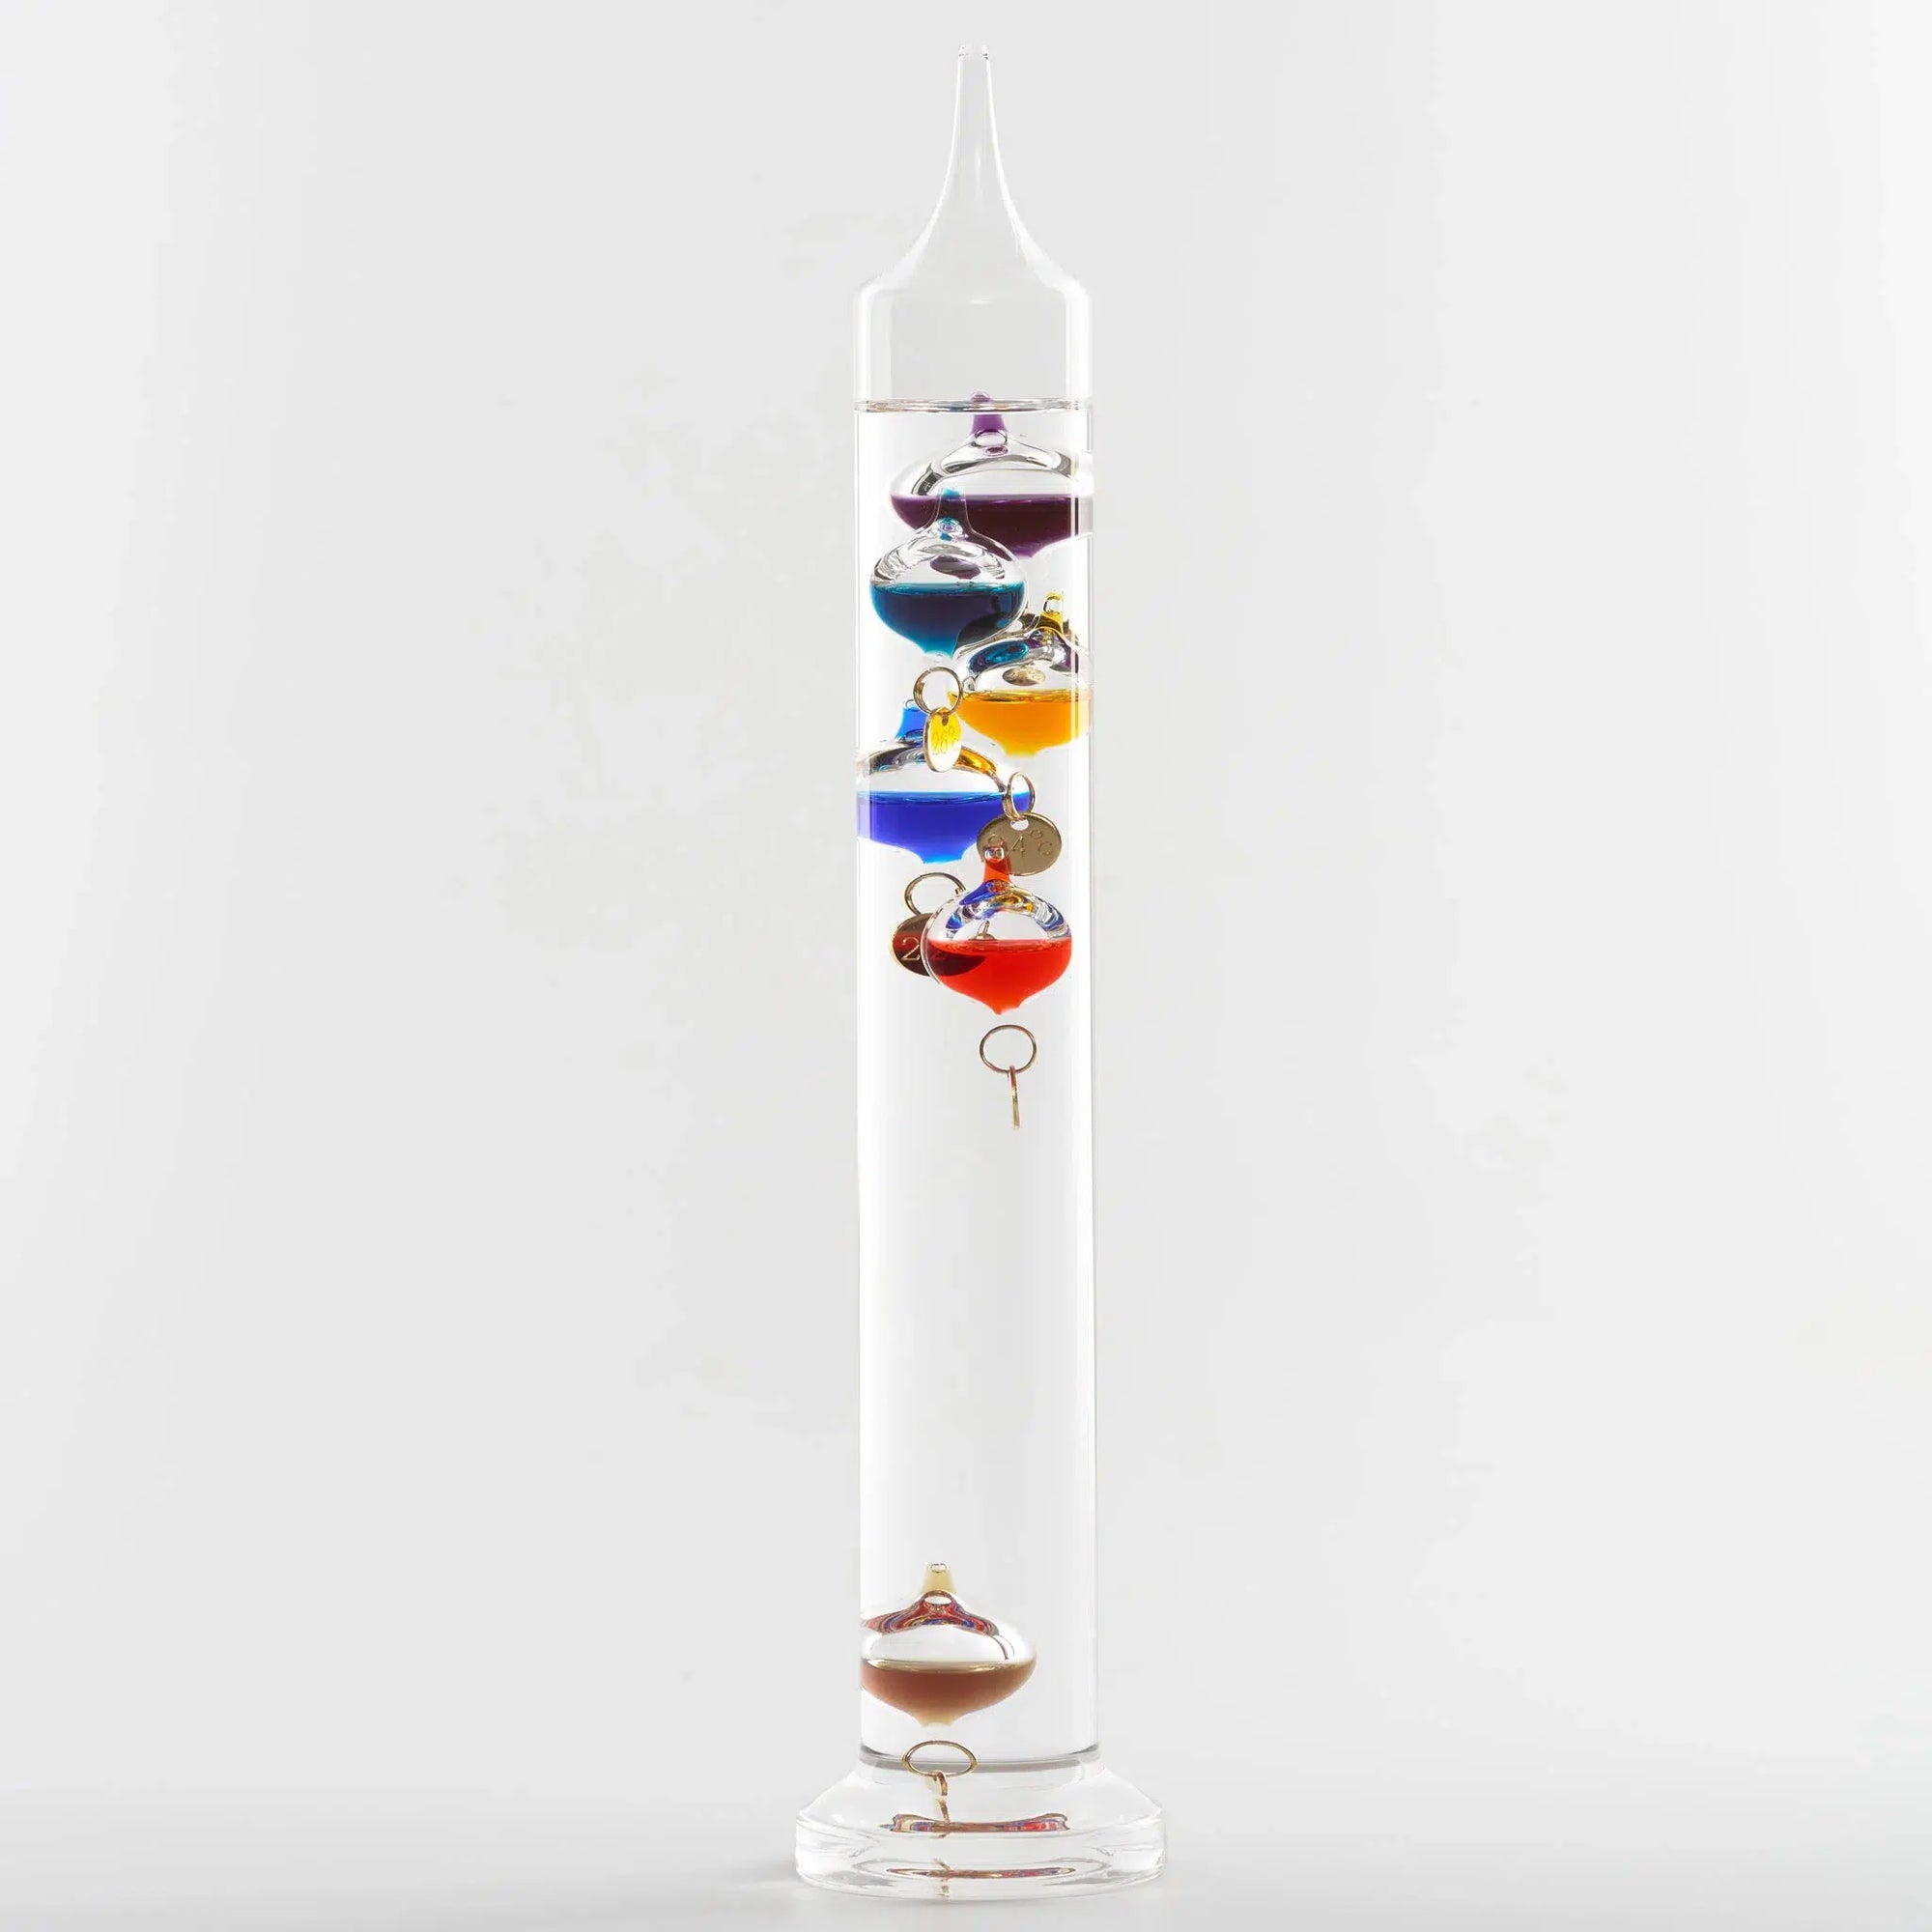 Galileo Thermometer - 11" tall-Science & Discovery-Heebie Jeebies-Yellow Springs Toy Company